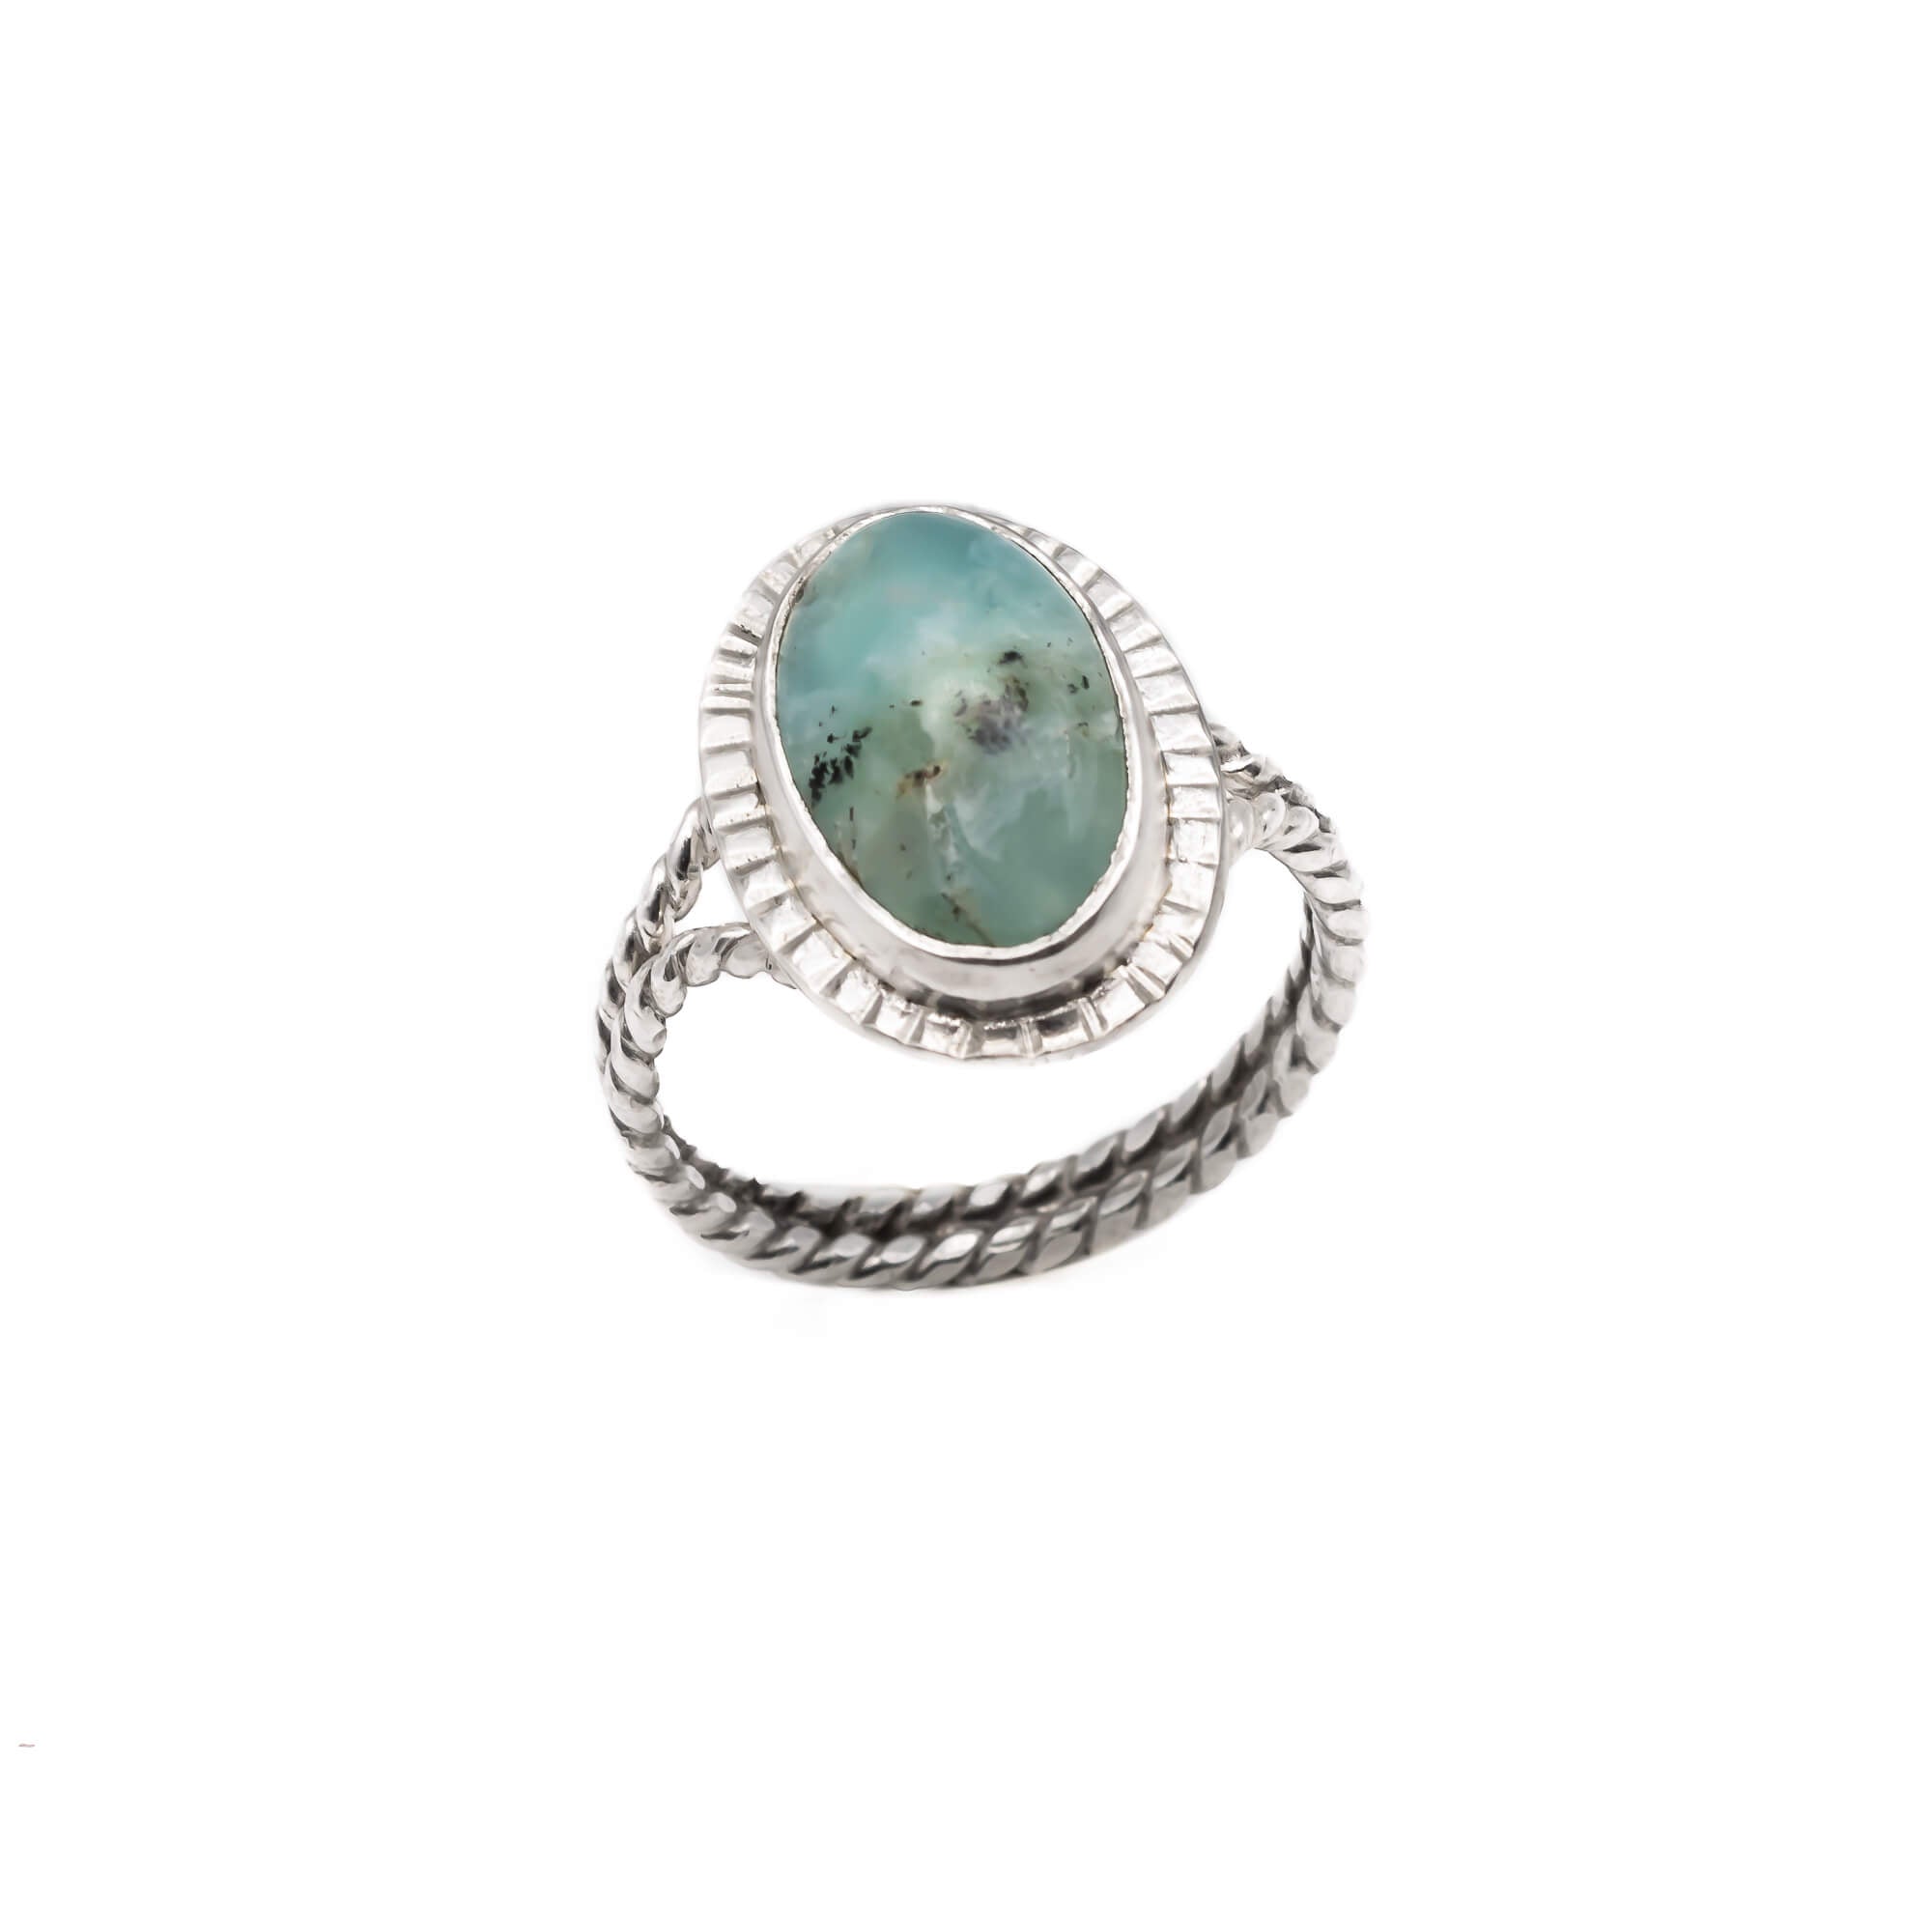 Blue-opal-sterling-silver-ring-with-twisted-wire-band